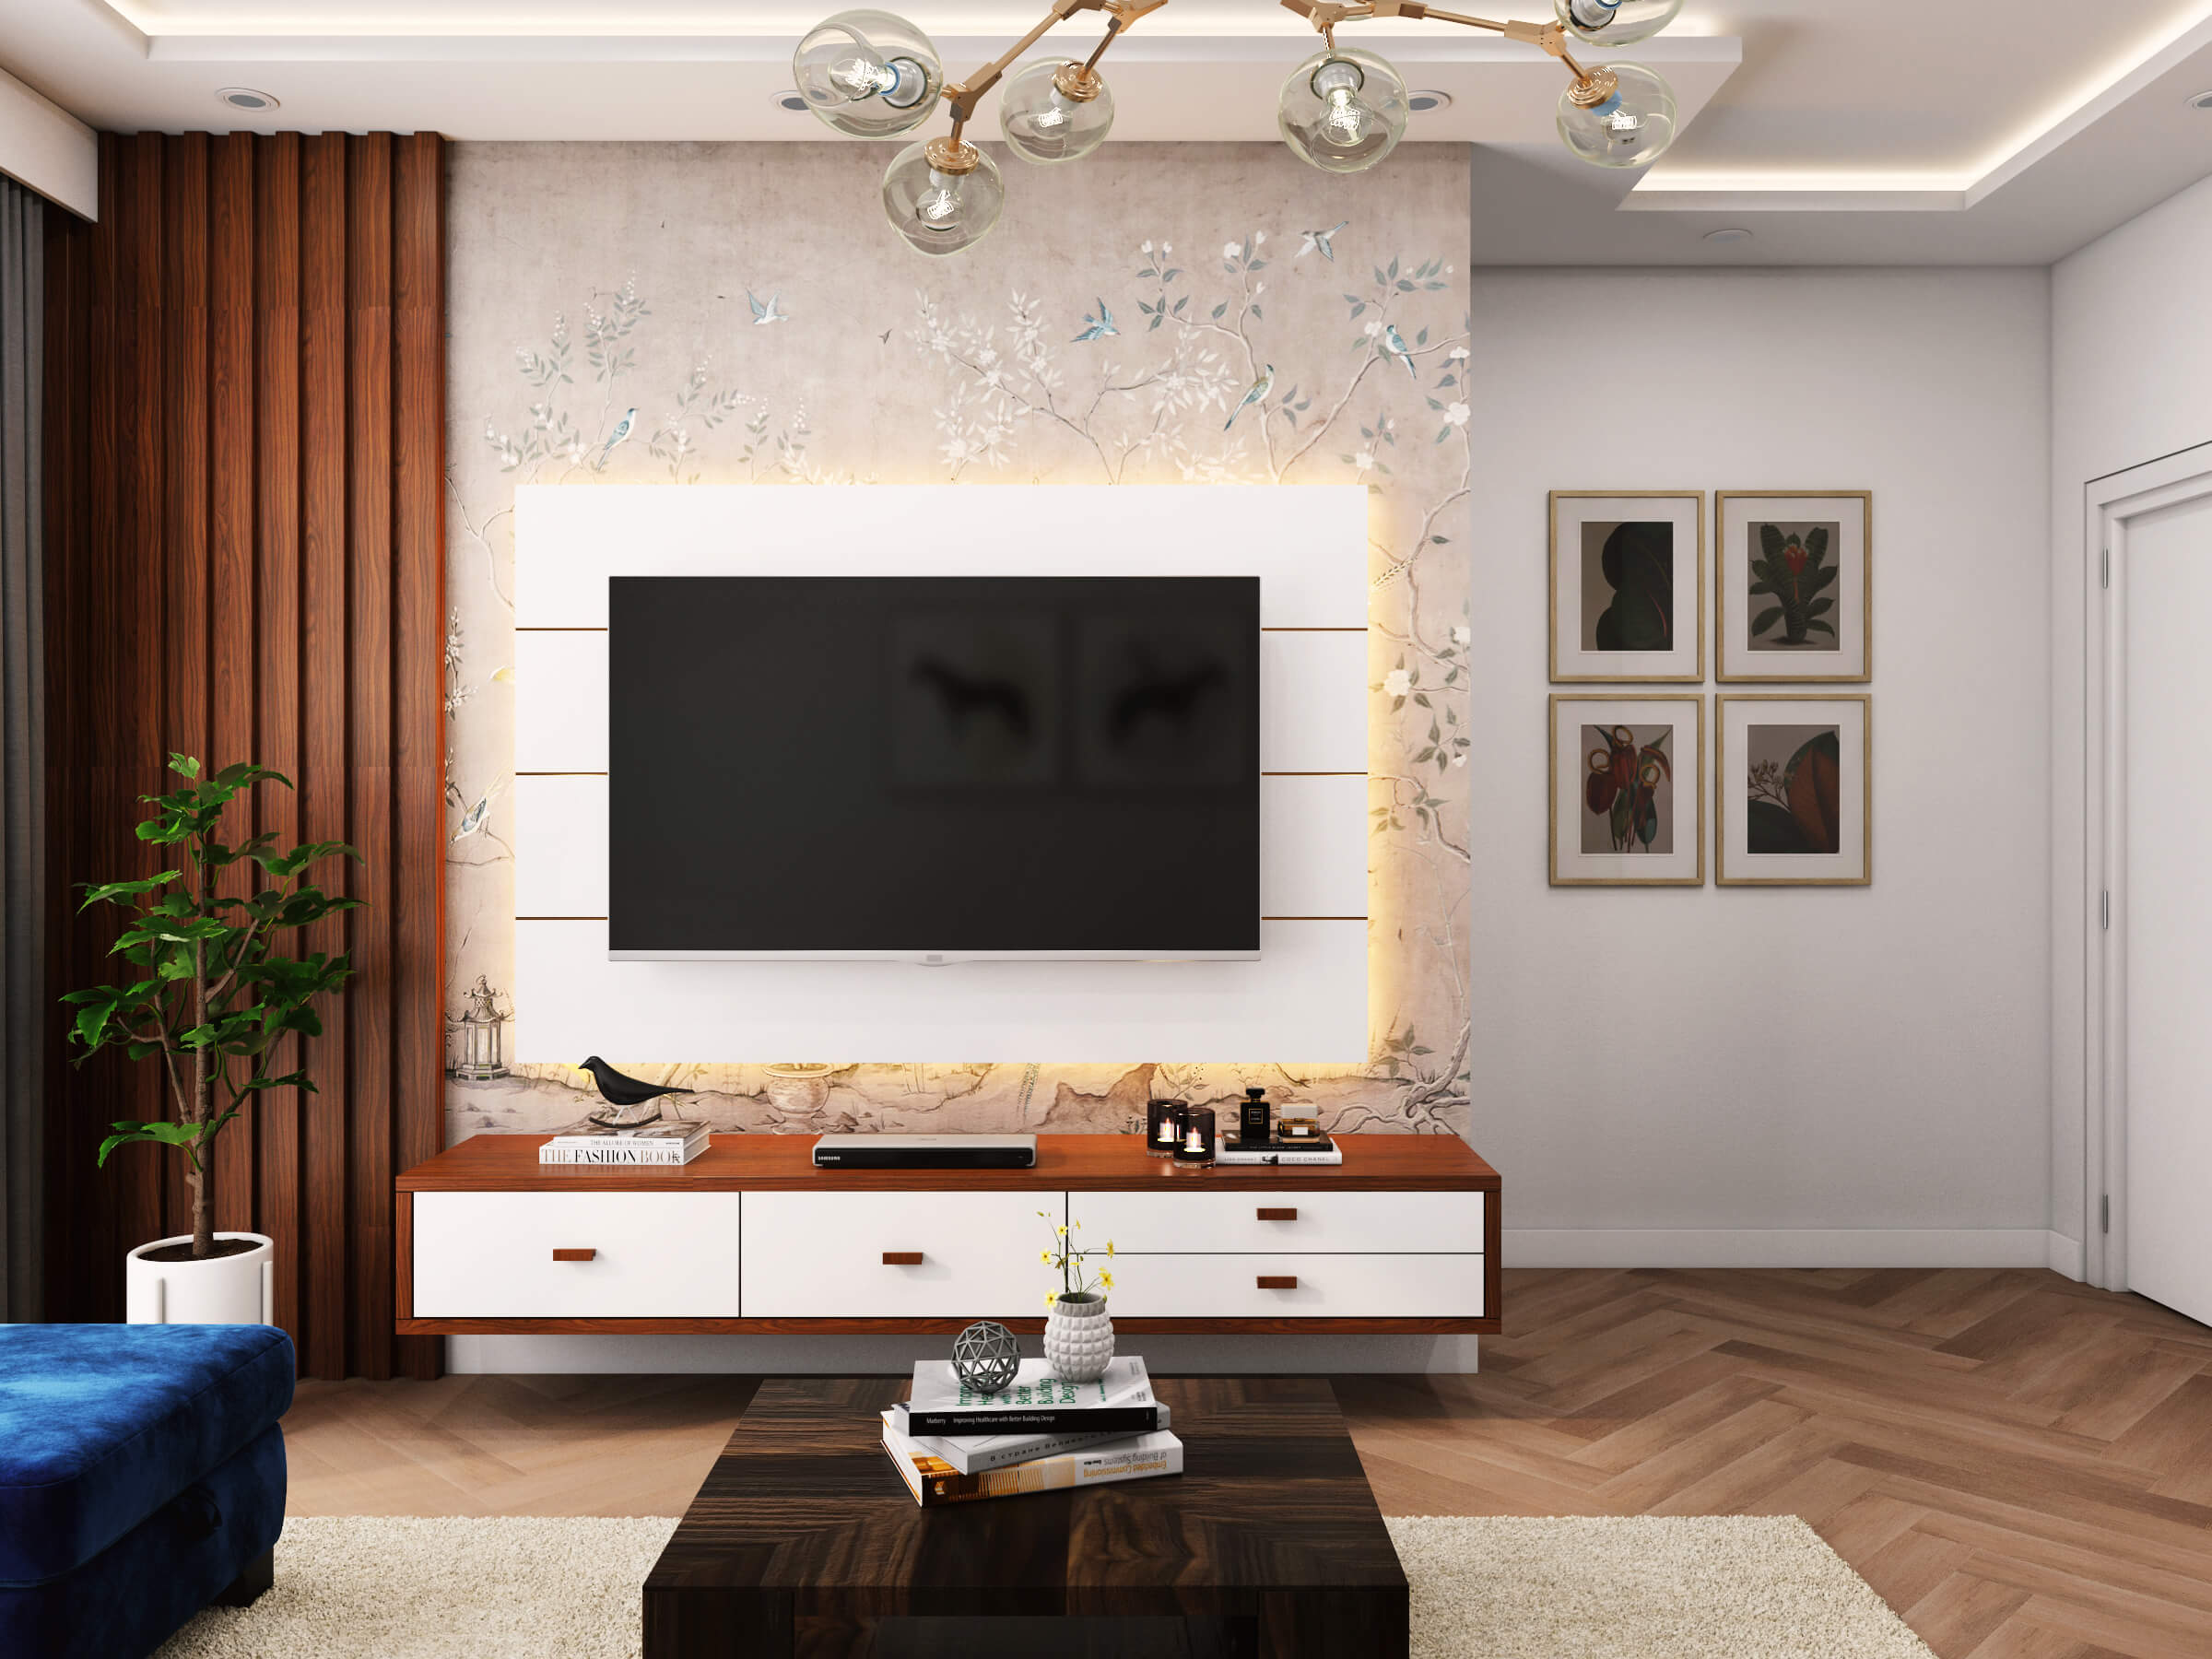 largest-design-collection-for-tv-units-modular-kitchens-bedroom-living-interiors-brand-in-delhi-new-delhi-india